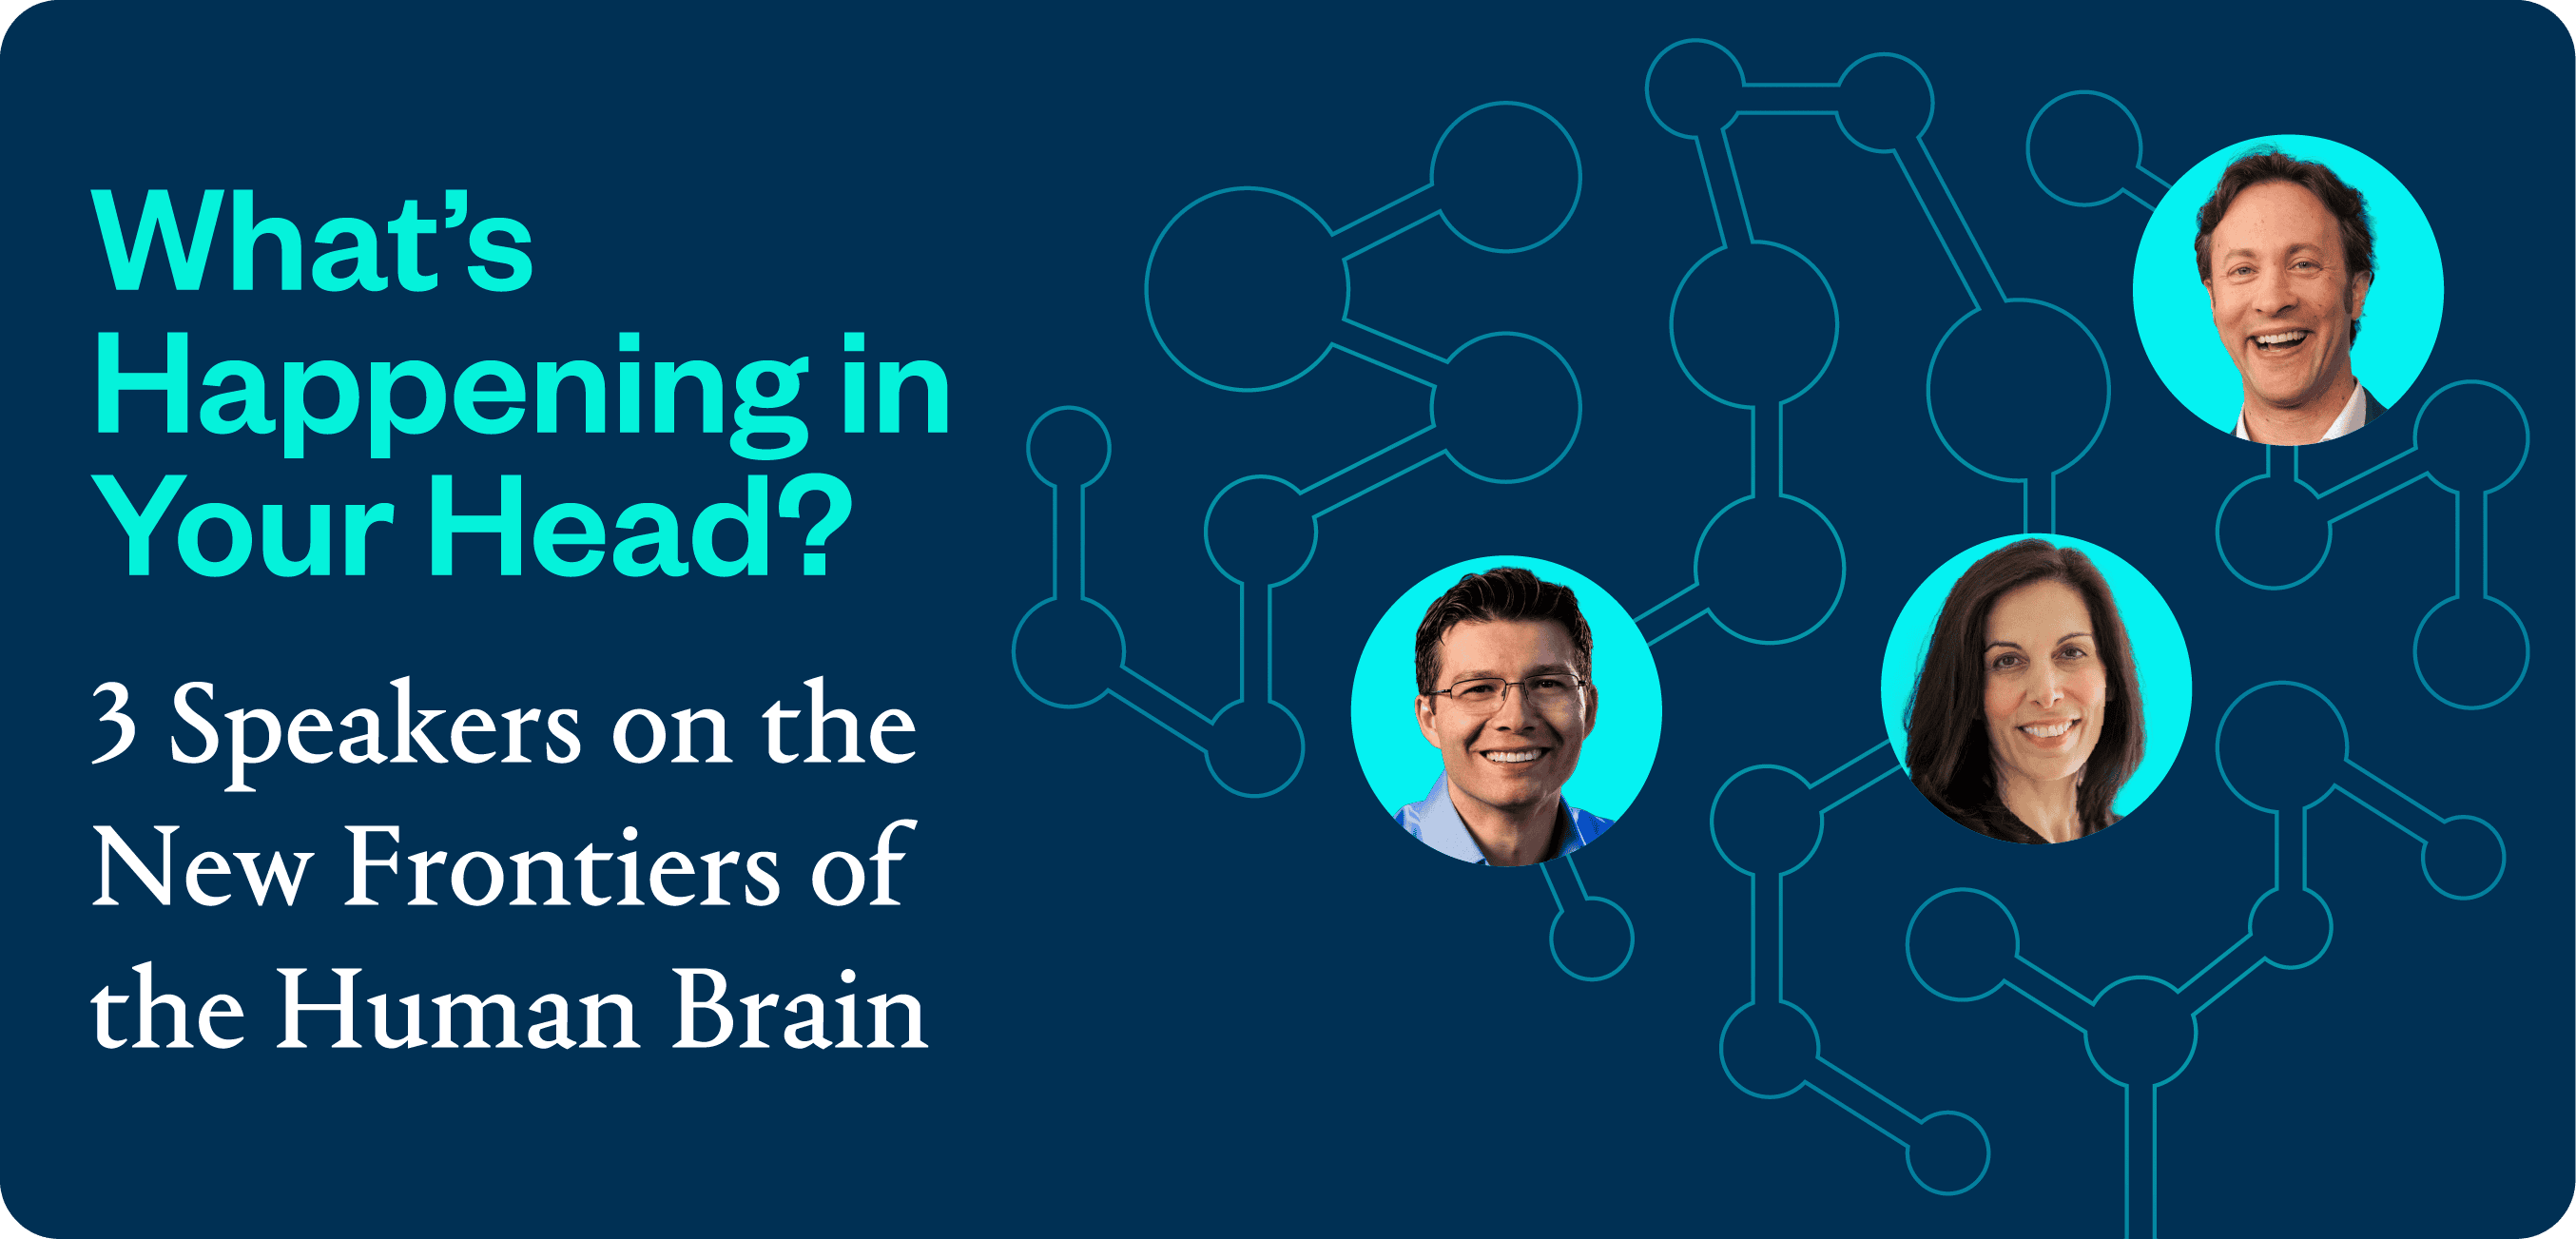 What Does the Future of Your Brain Look Like? 3 Neuroscience Speakers on the New Frontiers of the Human Mind